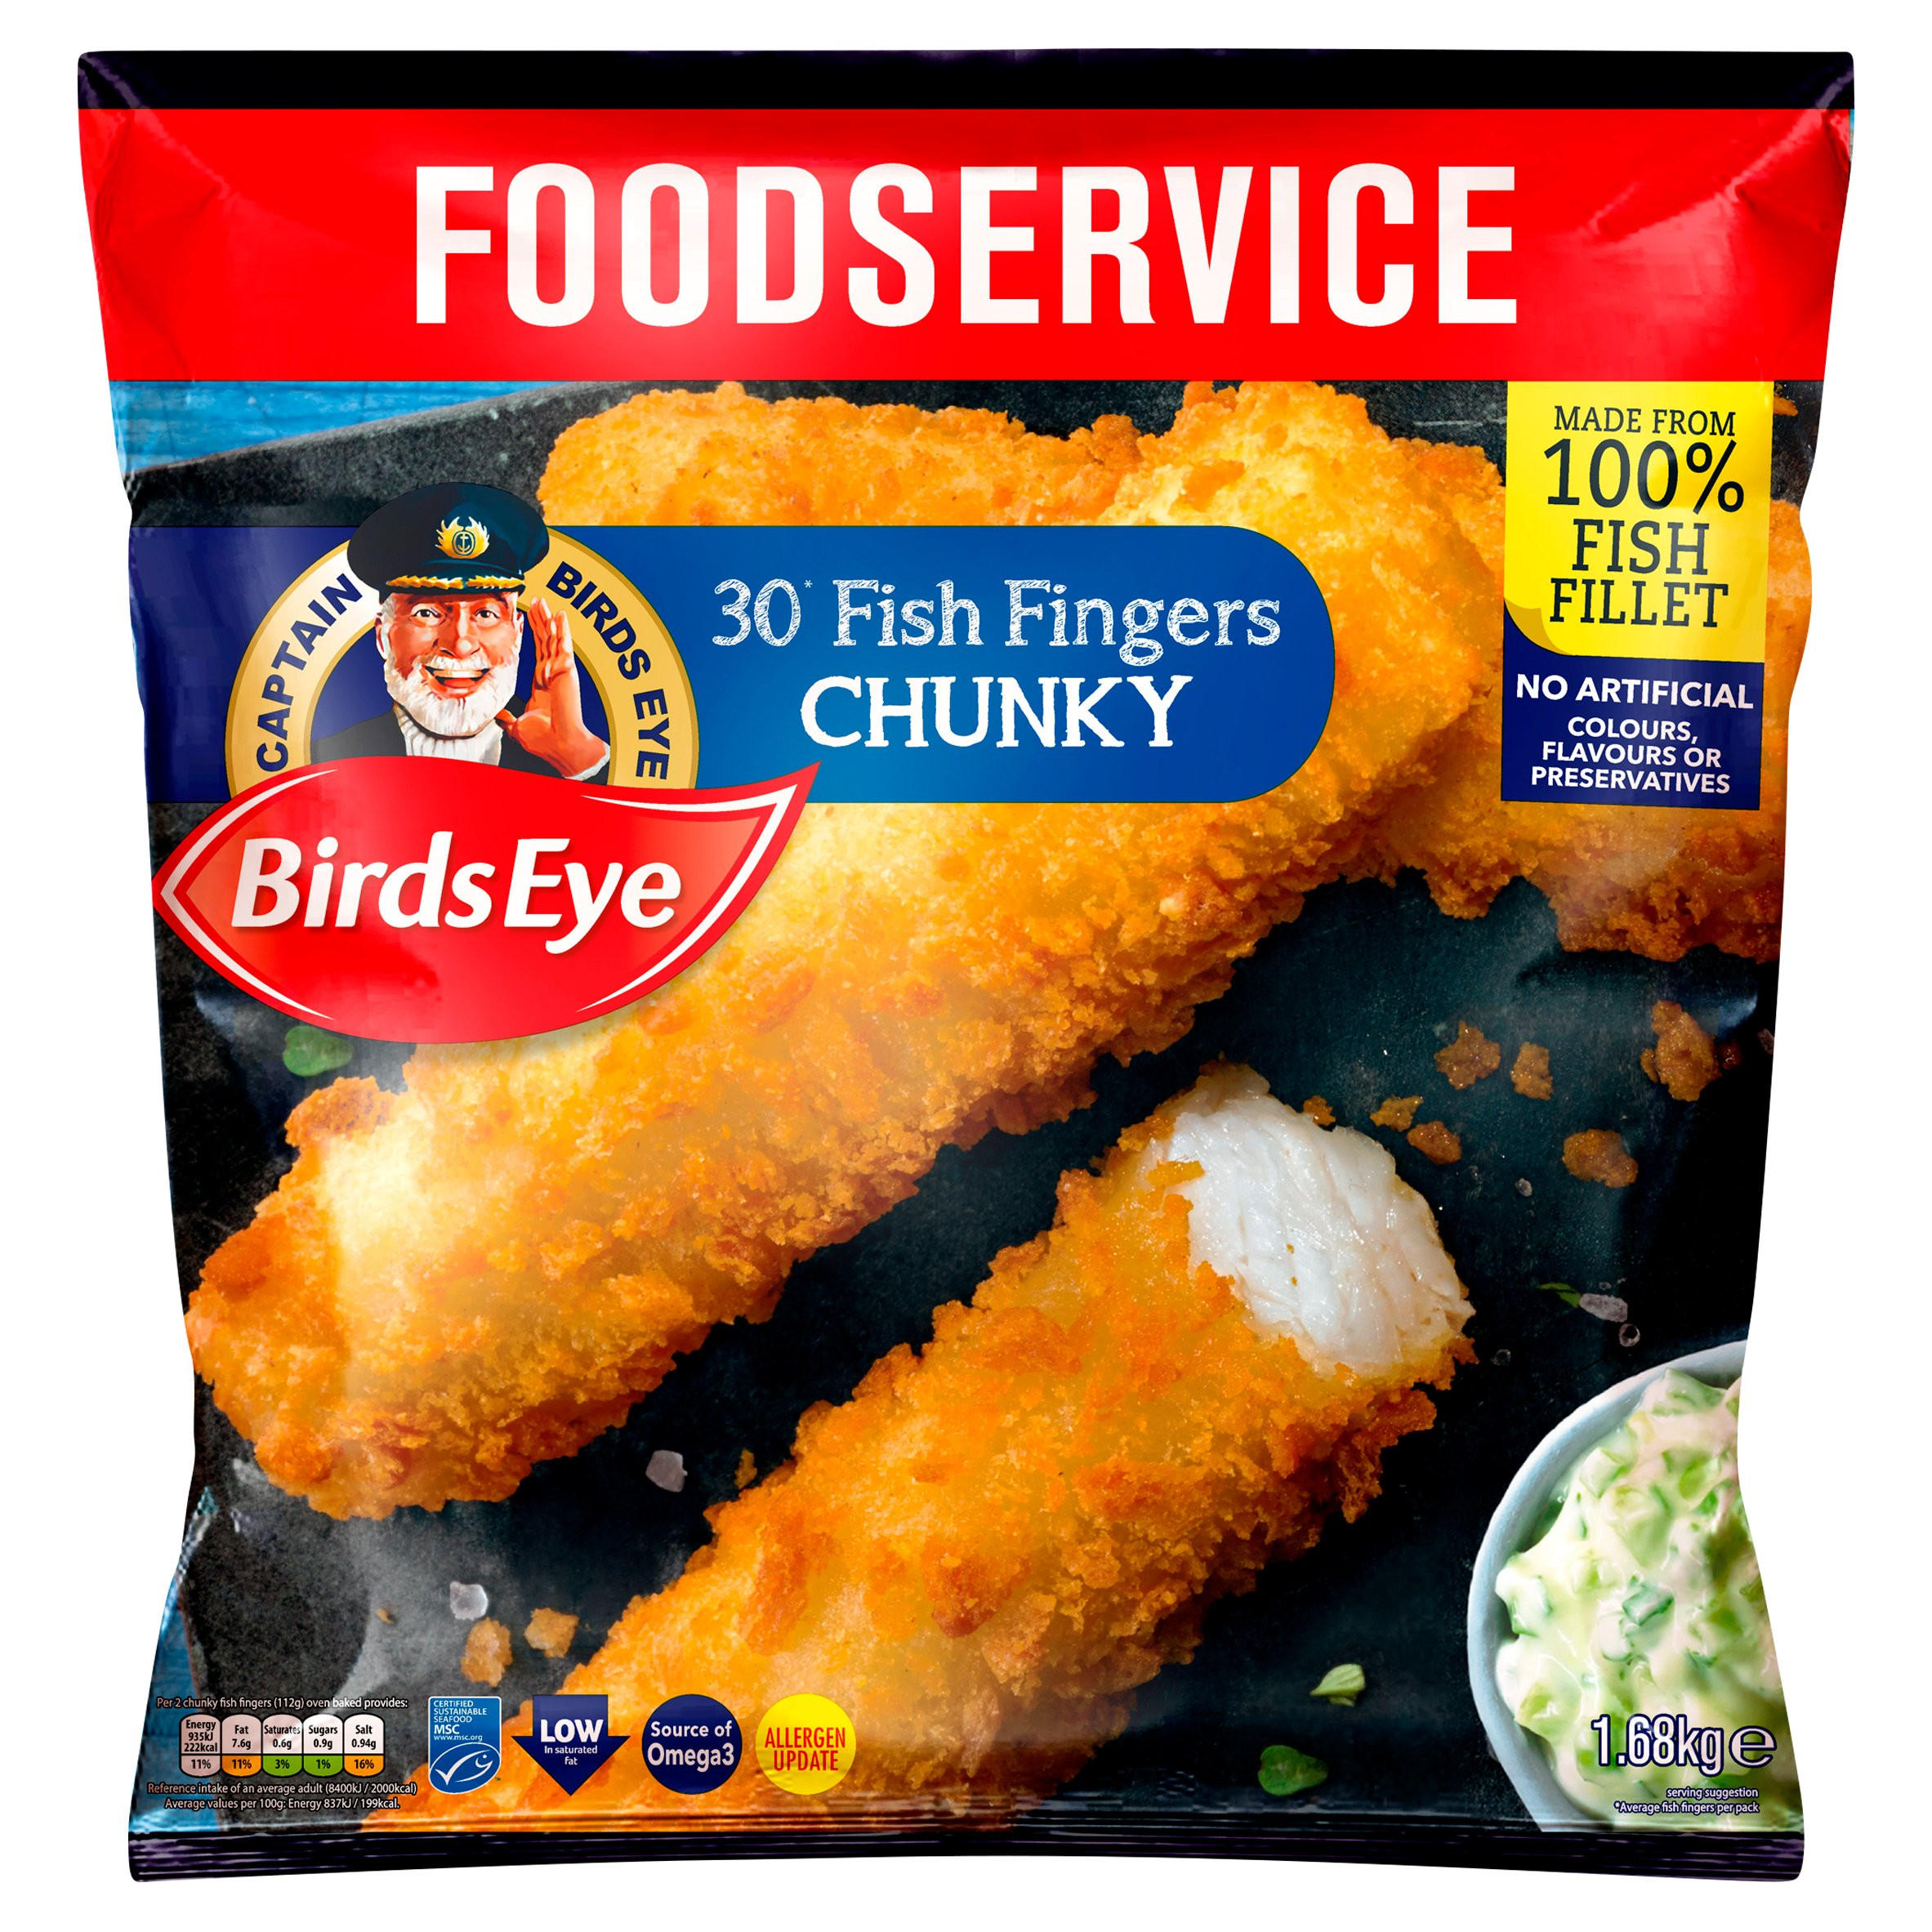 Birds Eye 30 Cod Fish Fingers 840g, Fish Fingers, Fish Cakes & Scampi